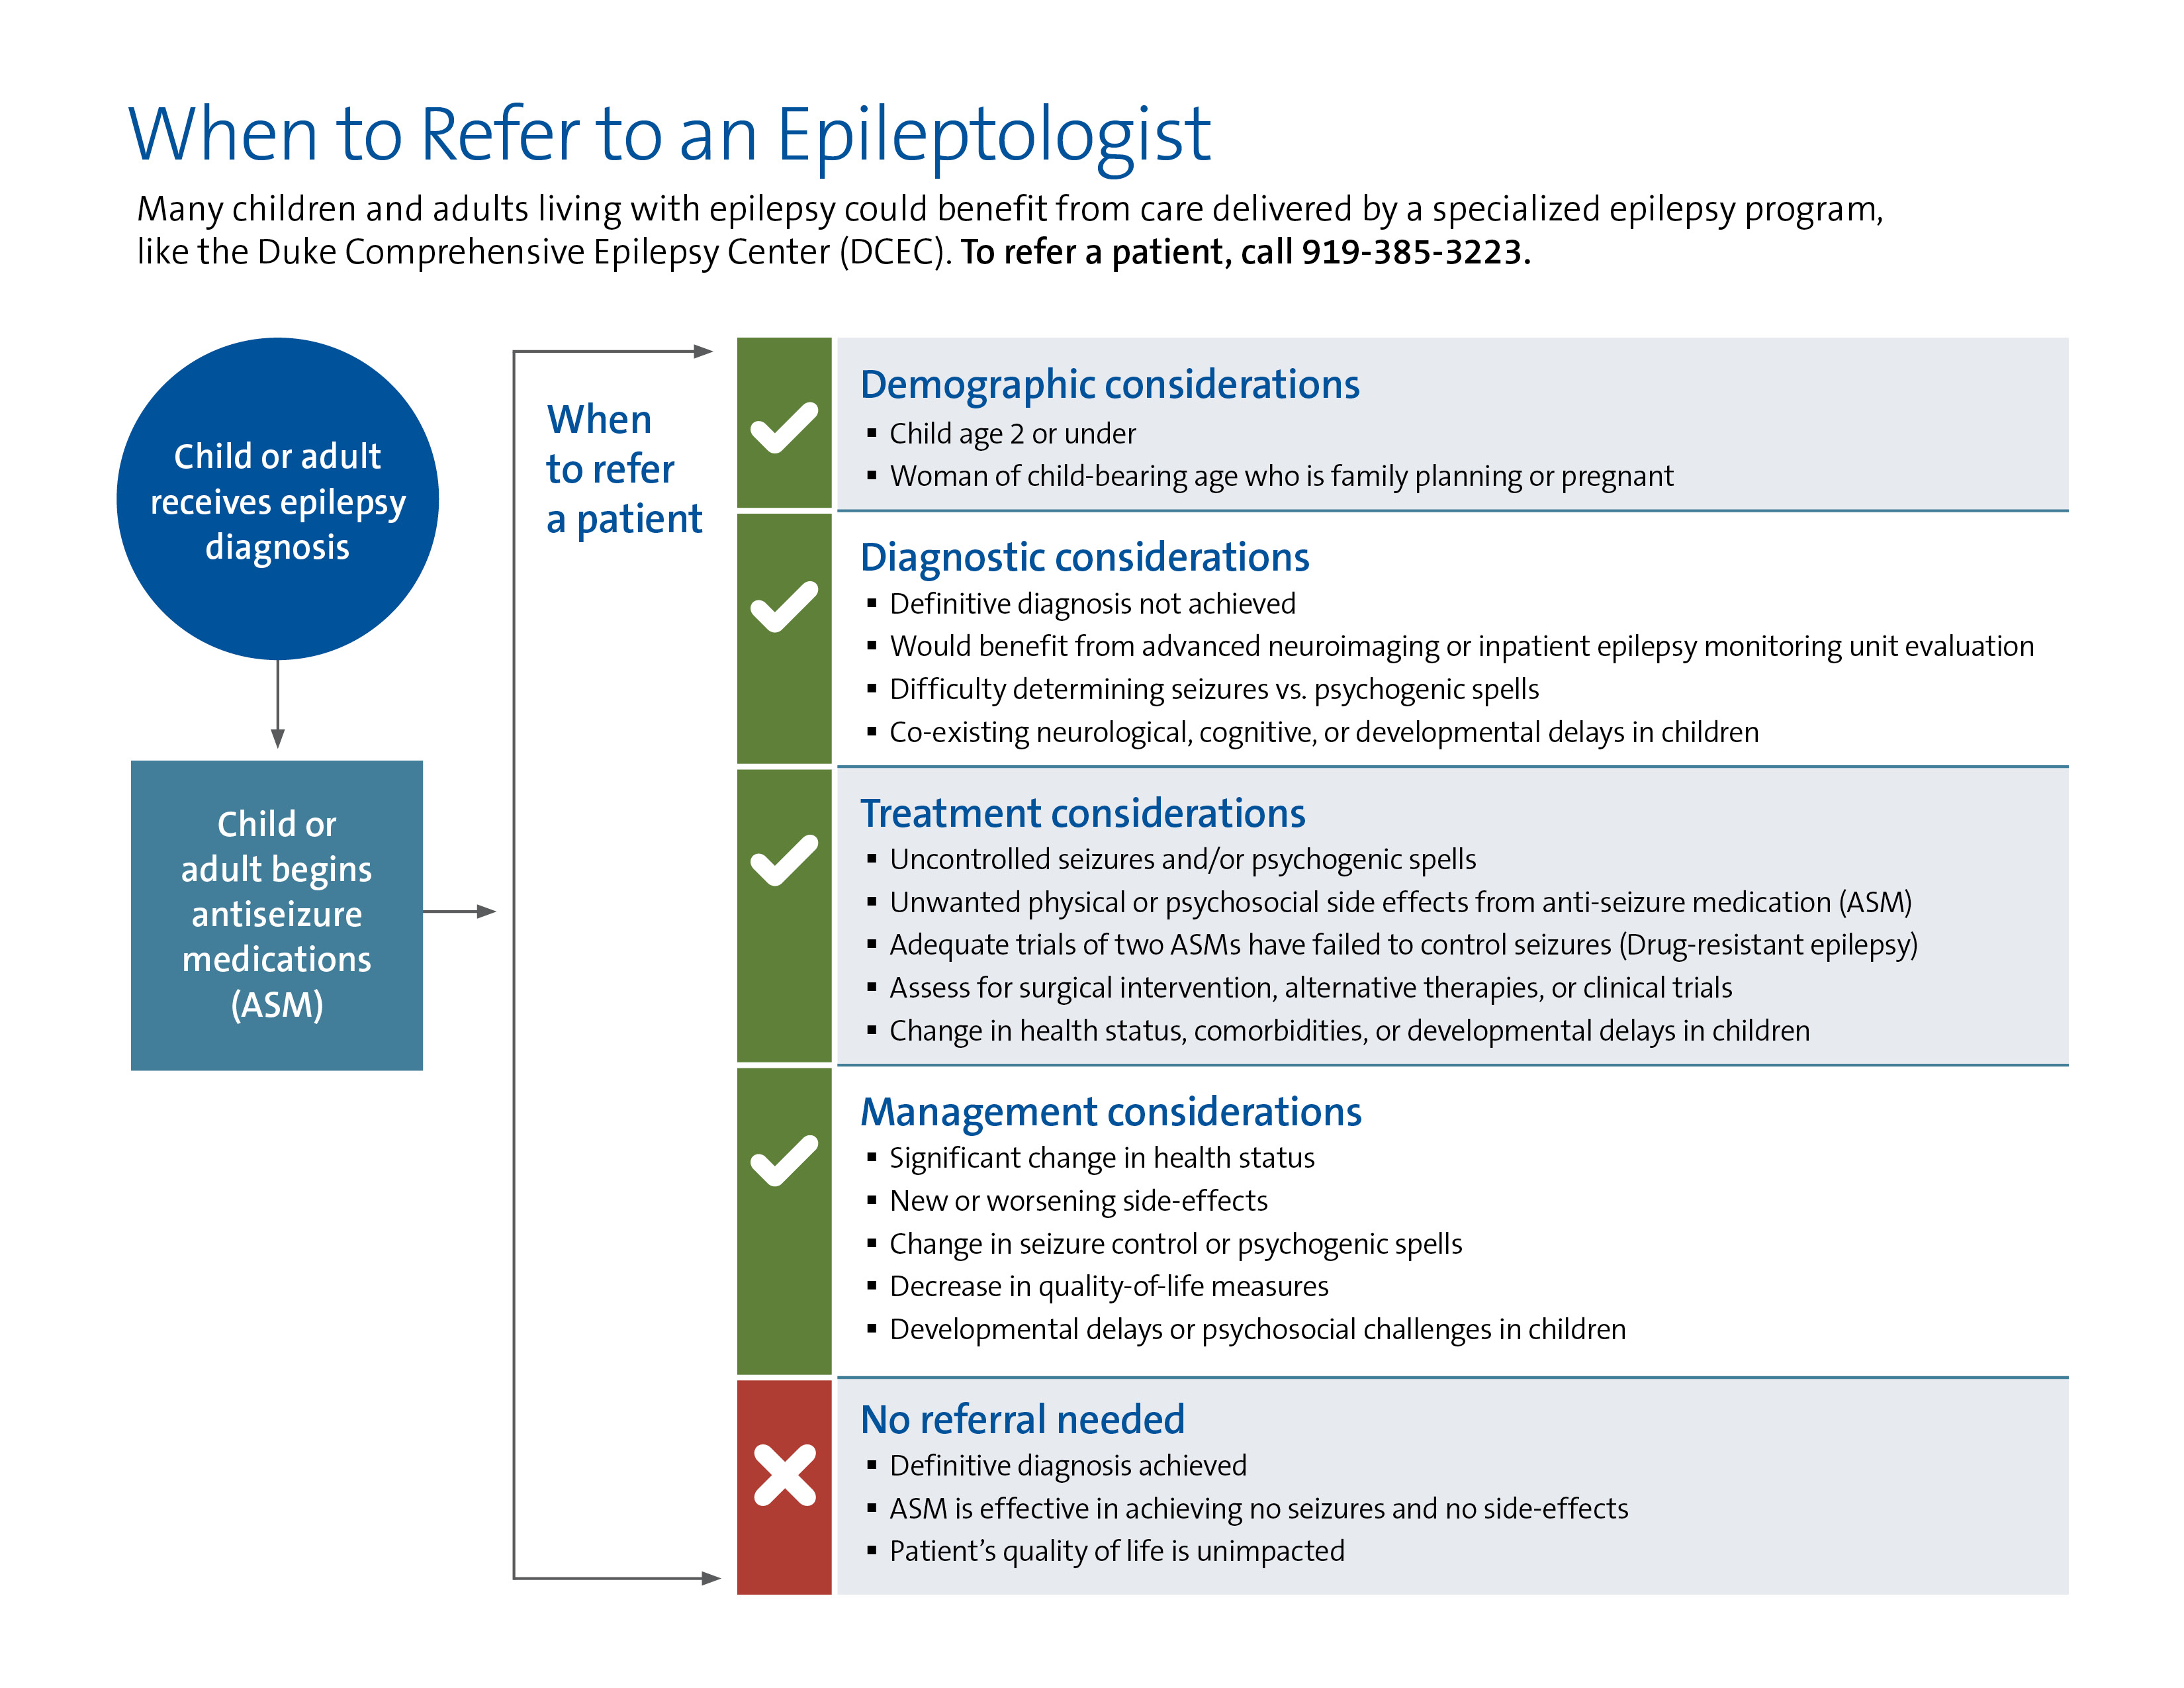 This graphic explains when to refer to an epileptologist, including demographic, diagnostic, treatment and management considerations for adult and pediatric patients.